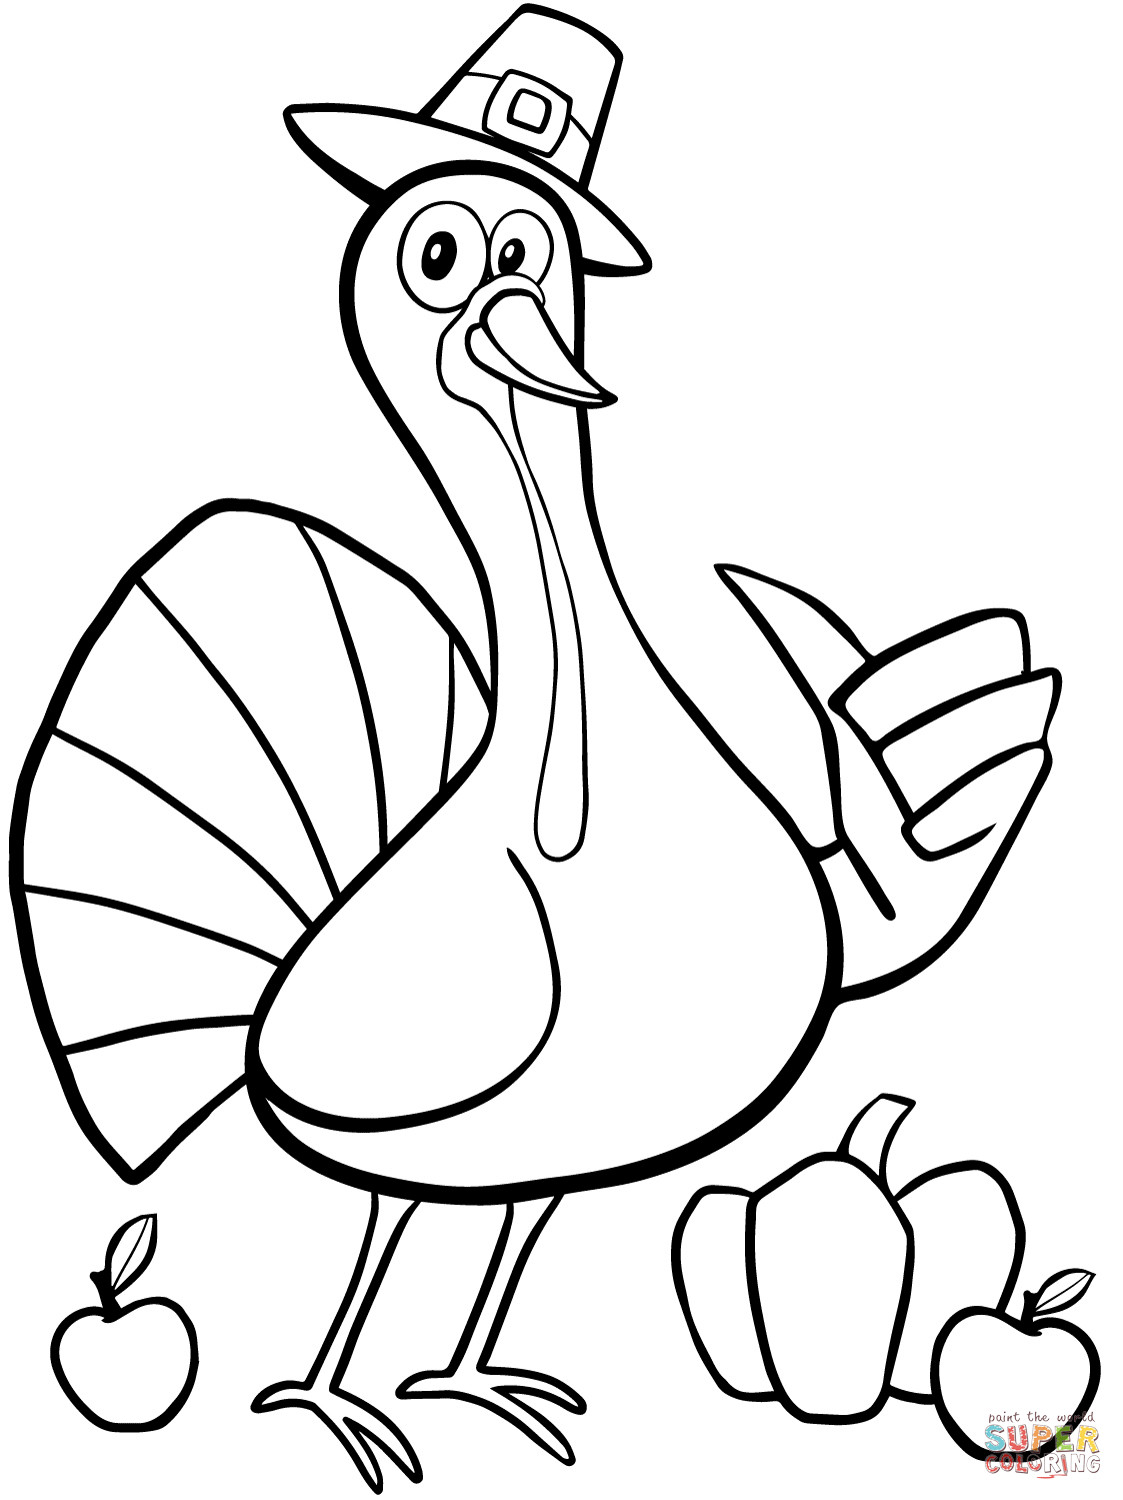 Thanksgiving Turkey Pictures To Color
 Cool Thanksgiving Turkey coloring page